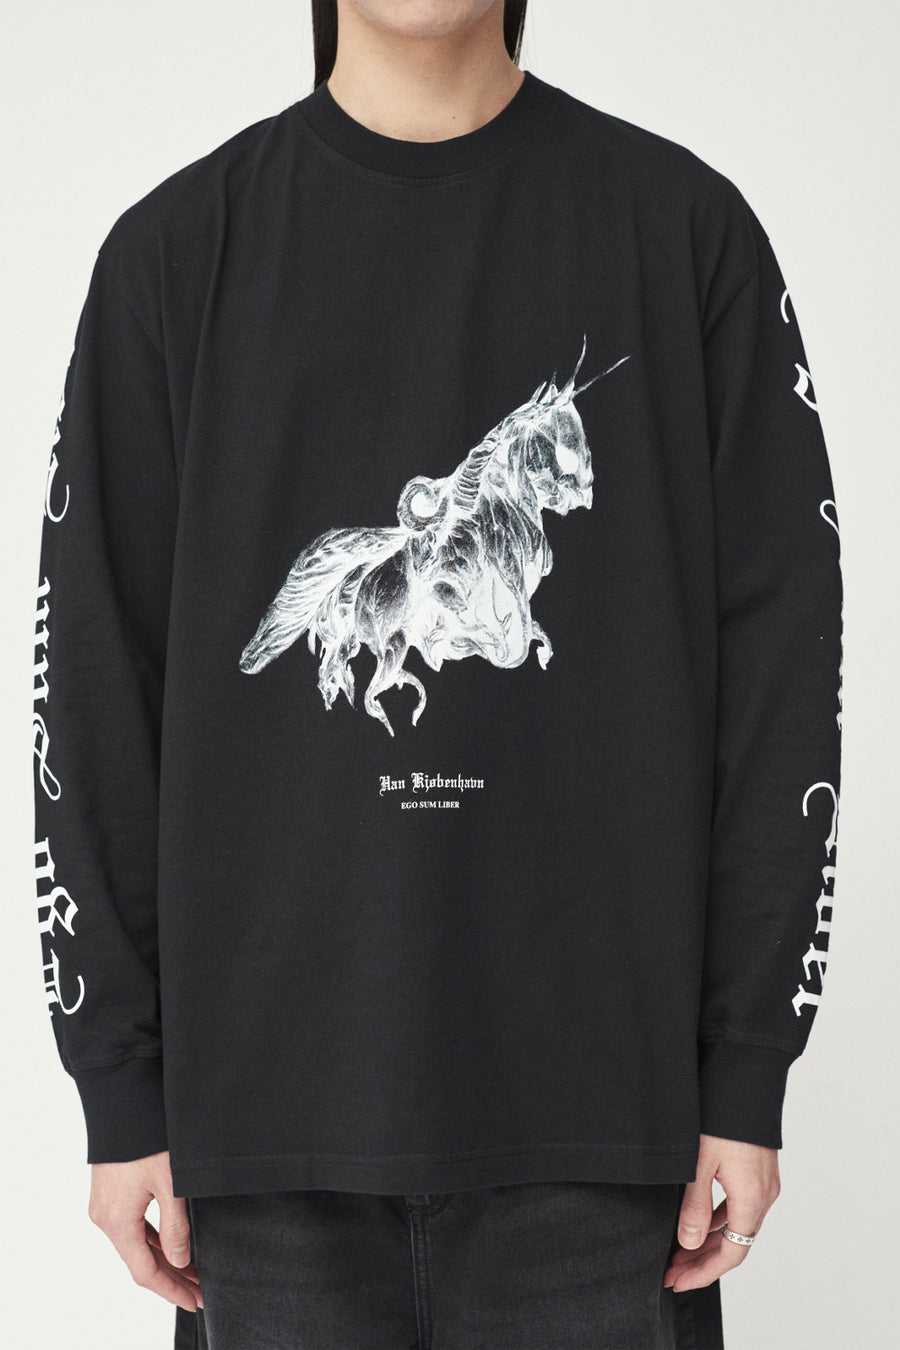 Buy the Han Kjobenhavn Unicorn Boxy L/S T-Shirt in Black at Intro. Spend £50 for free UK delivery. Official stockists. We ship worldwide.